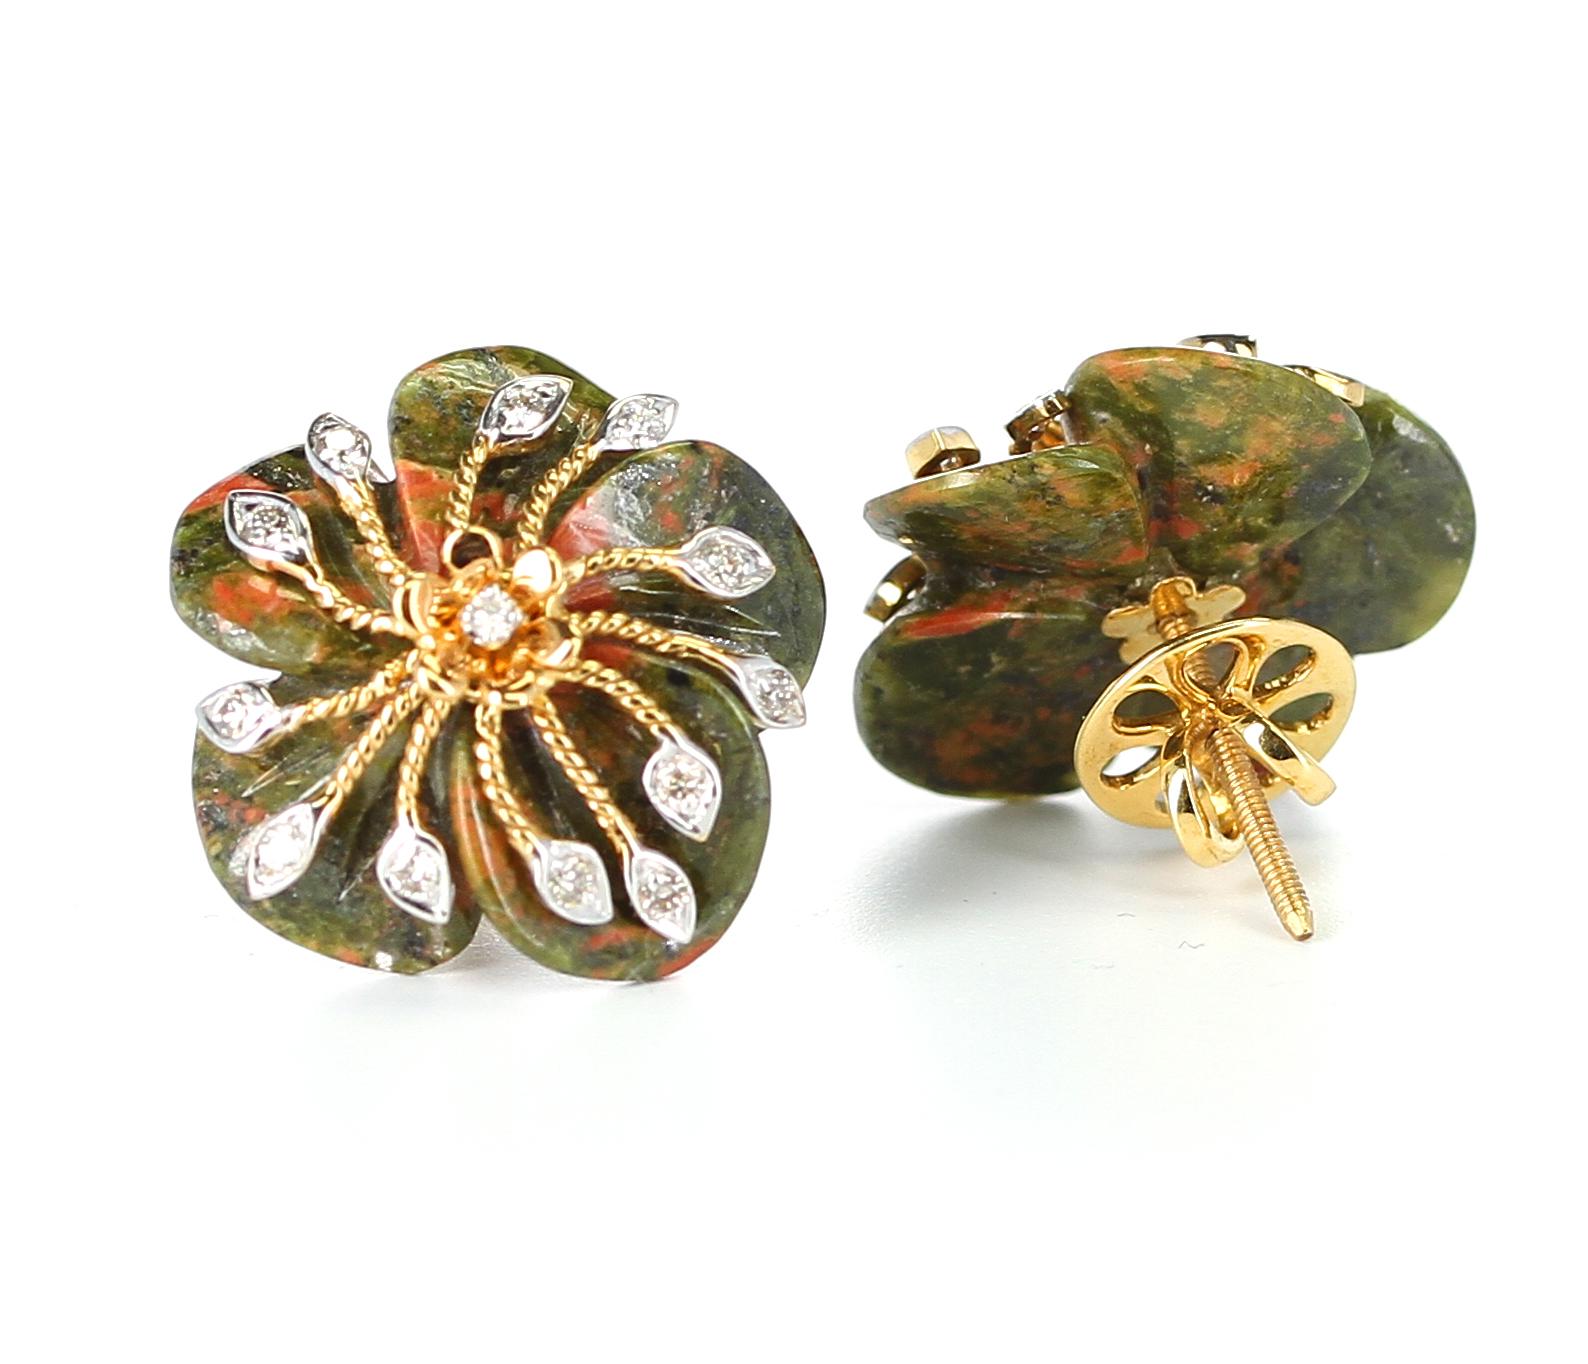 Round Cut Carved Unakite Green and Orange Tone Earrings with Diamonds, 14 Karat Gold For Sale